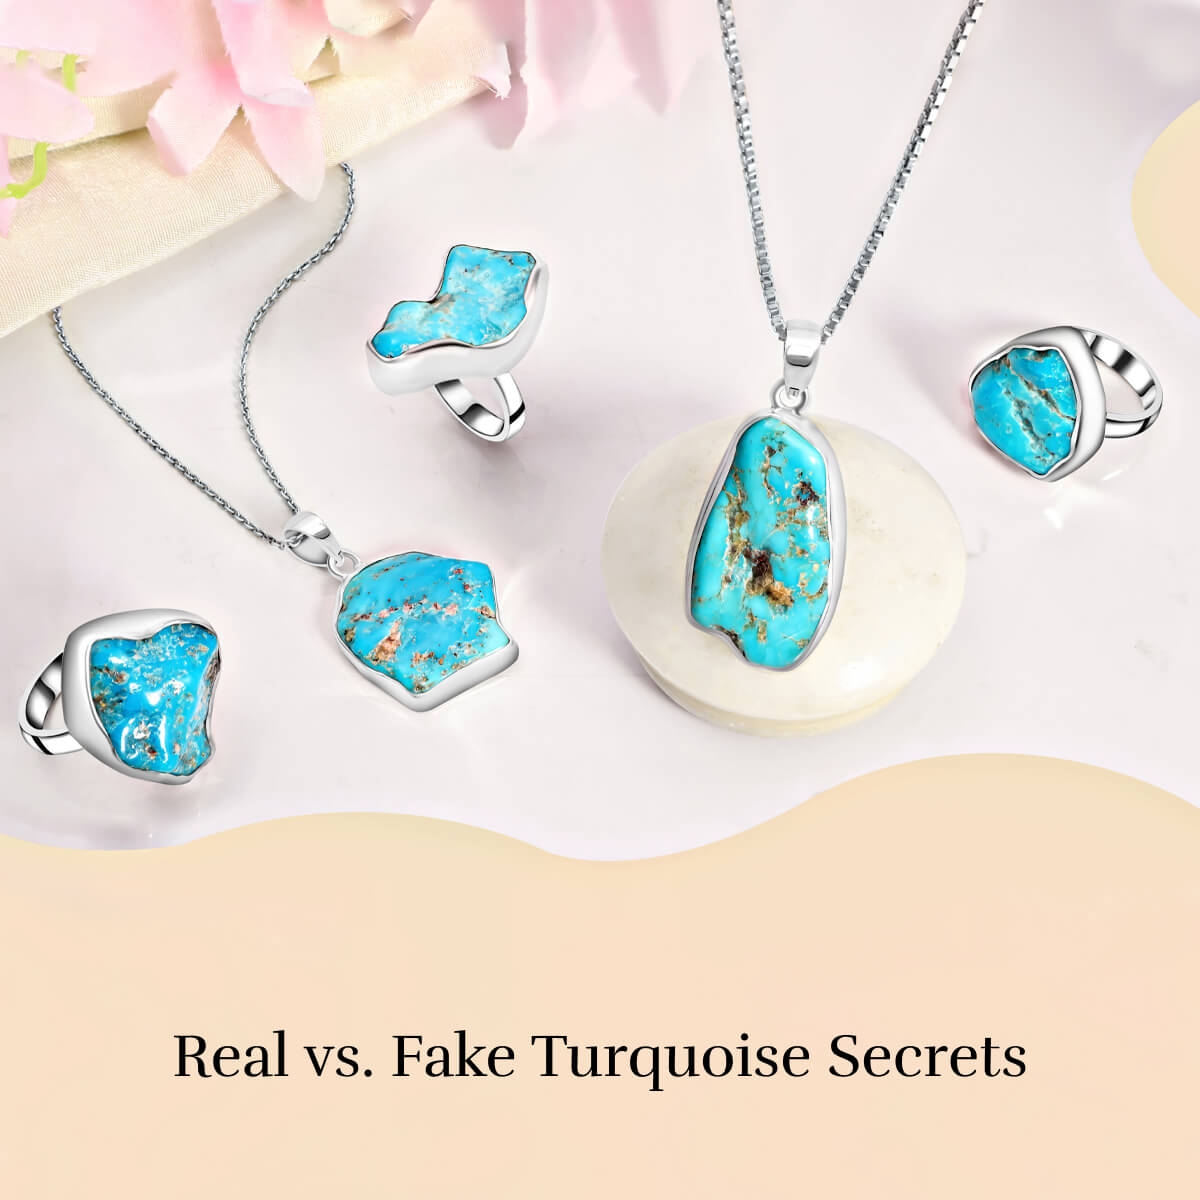 How Can You Tell Real Turquoise From Fake